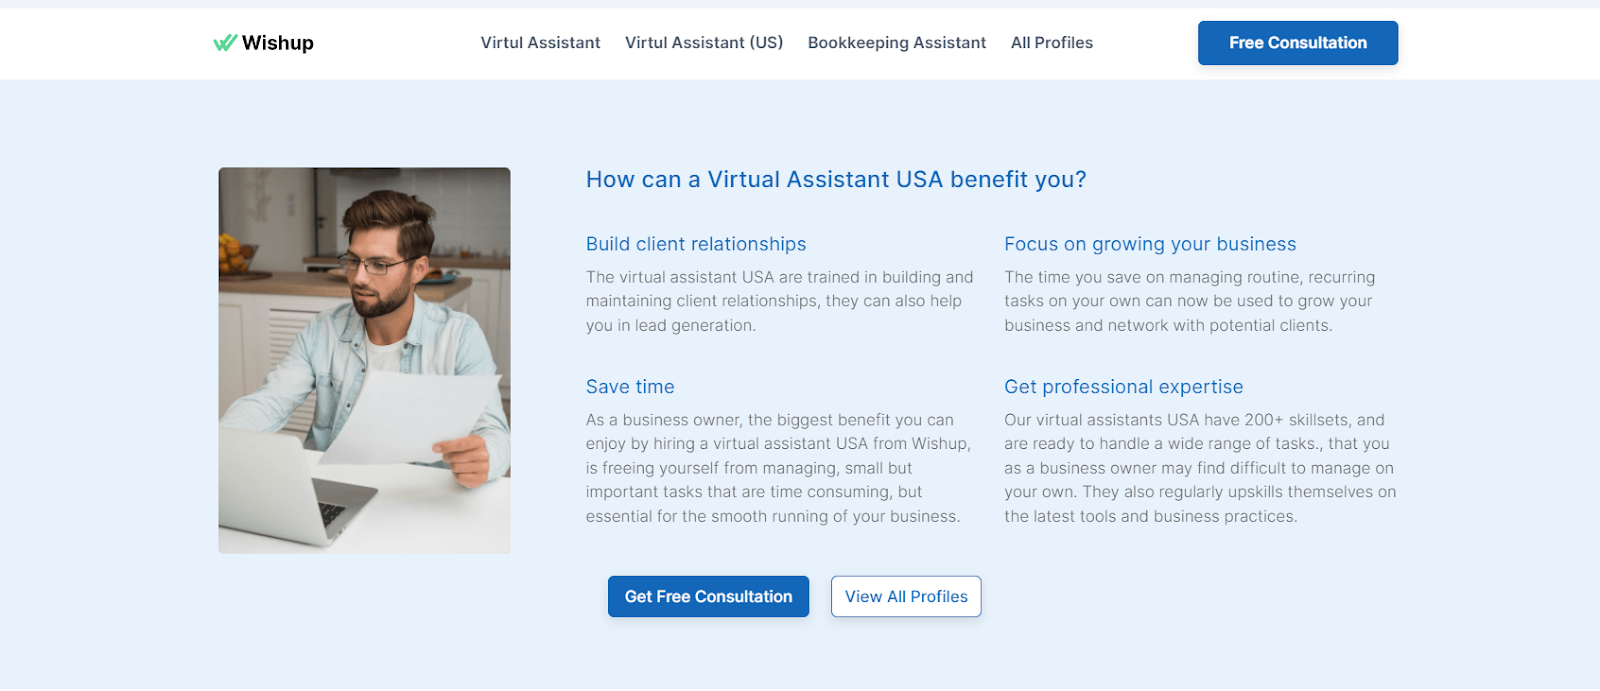 how can a virtual assistant benefit you?